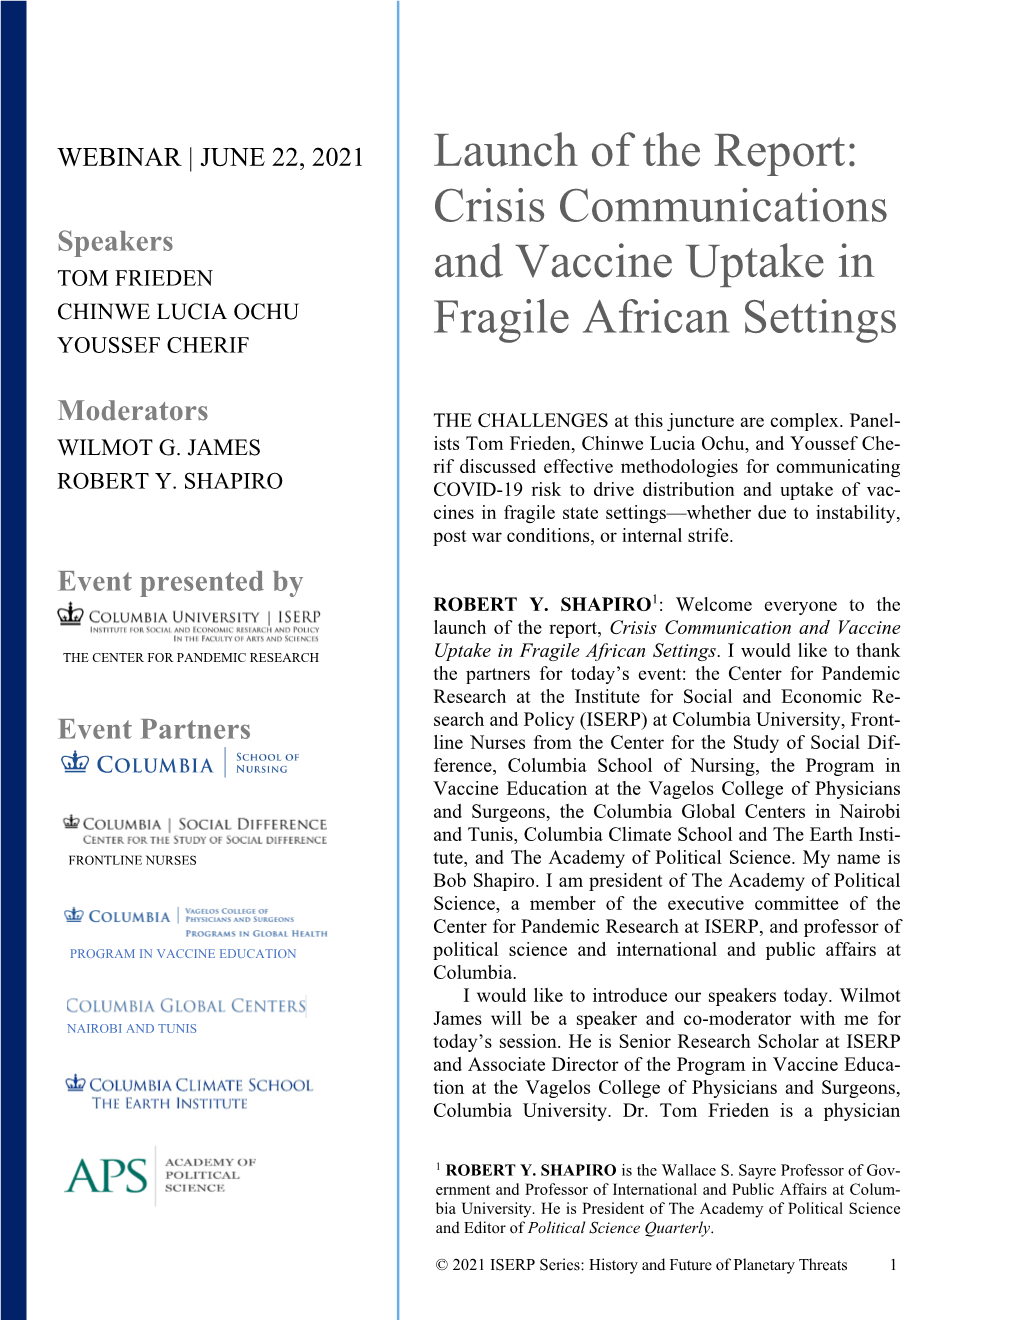 Crisis Communications and Vaccine Uptake in Fragile African Settings